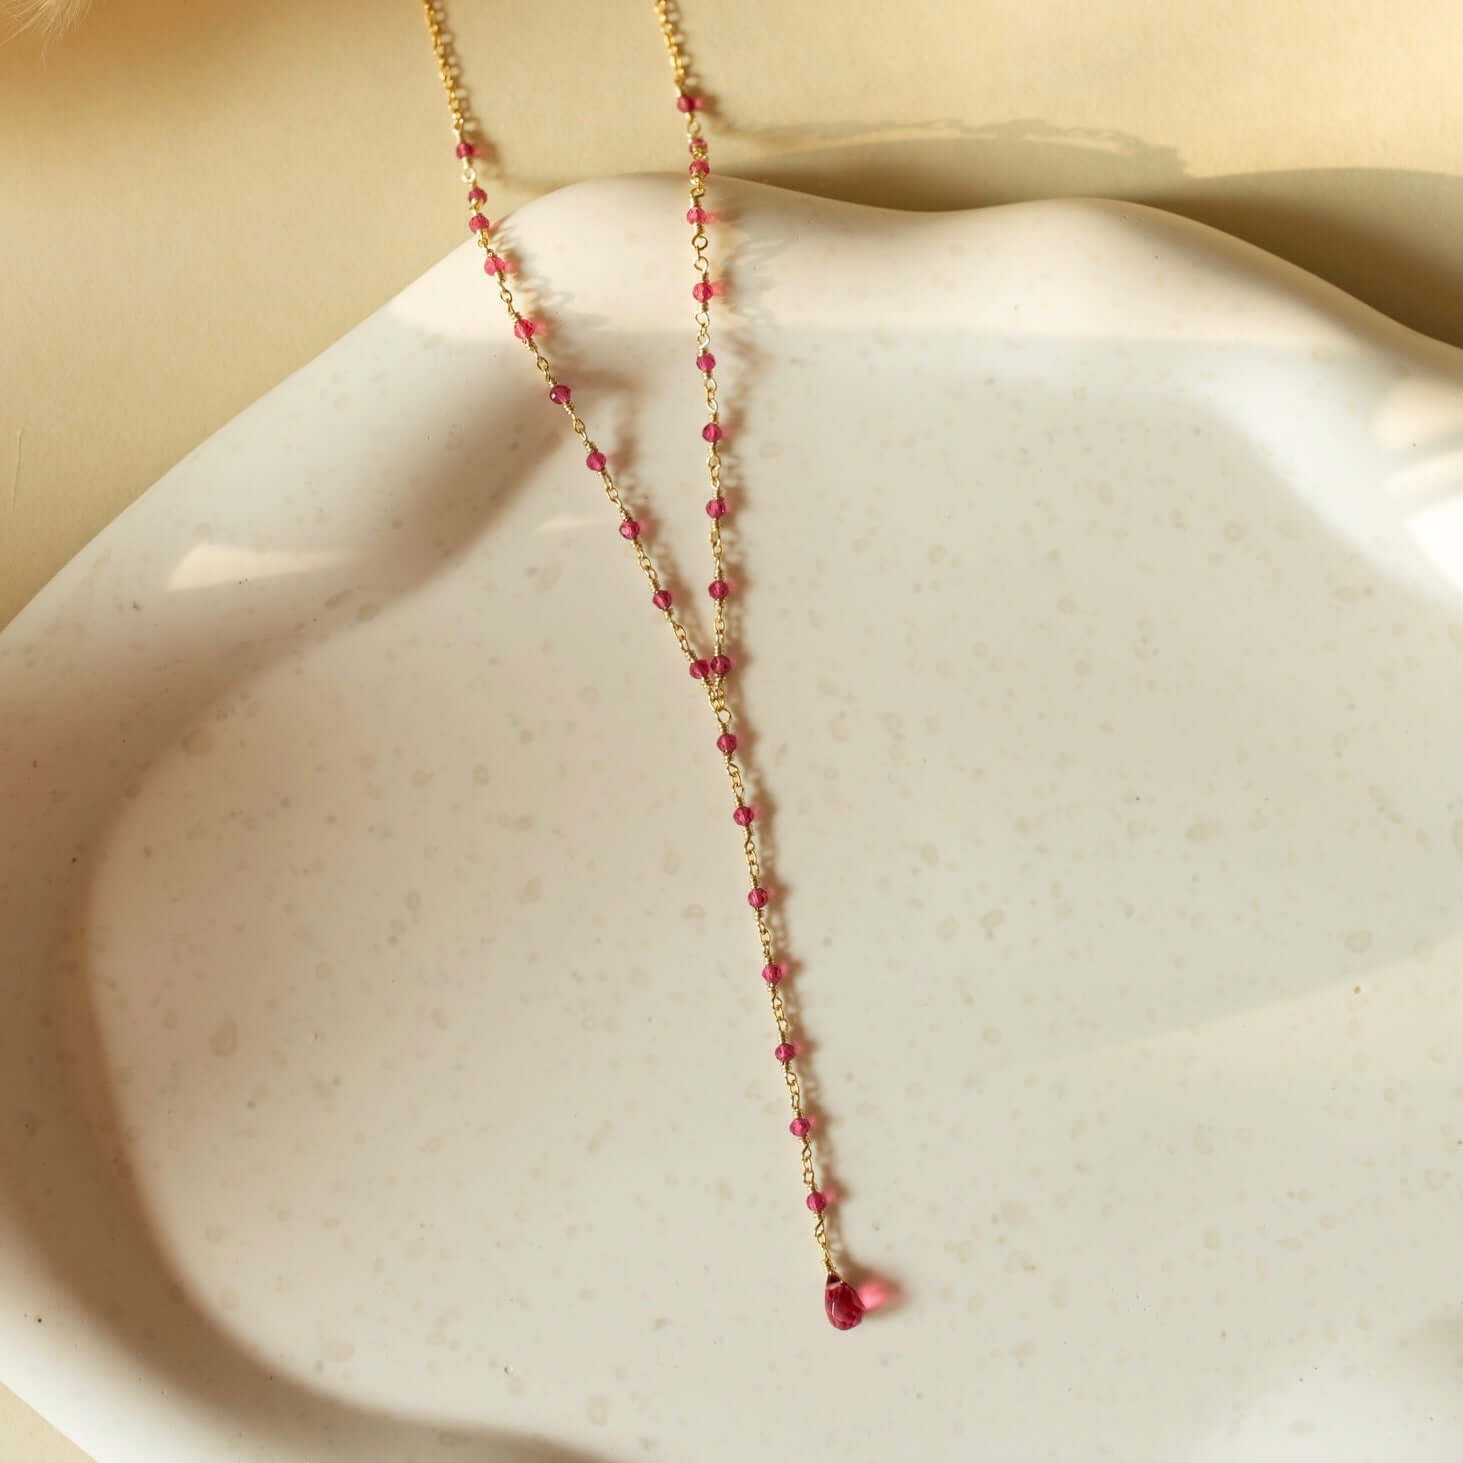 A pink necklace with tourmaline quartz laid on a clay plate.